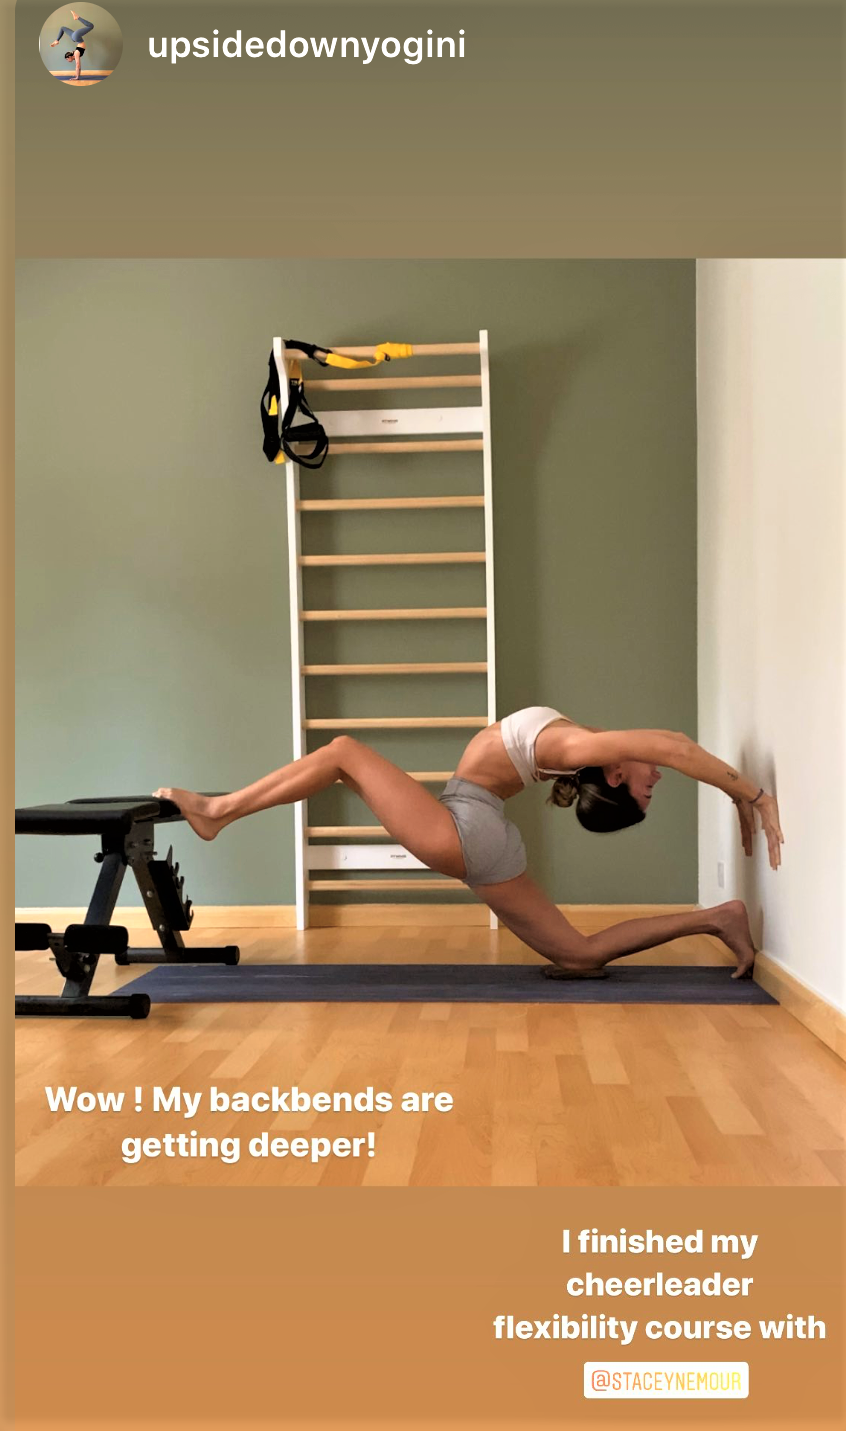 testimonial showing increased flexibility for back arch